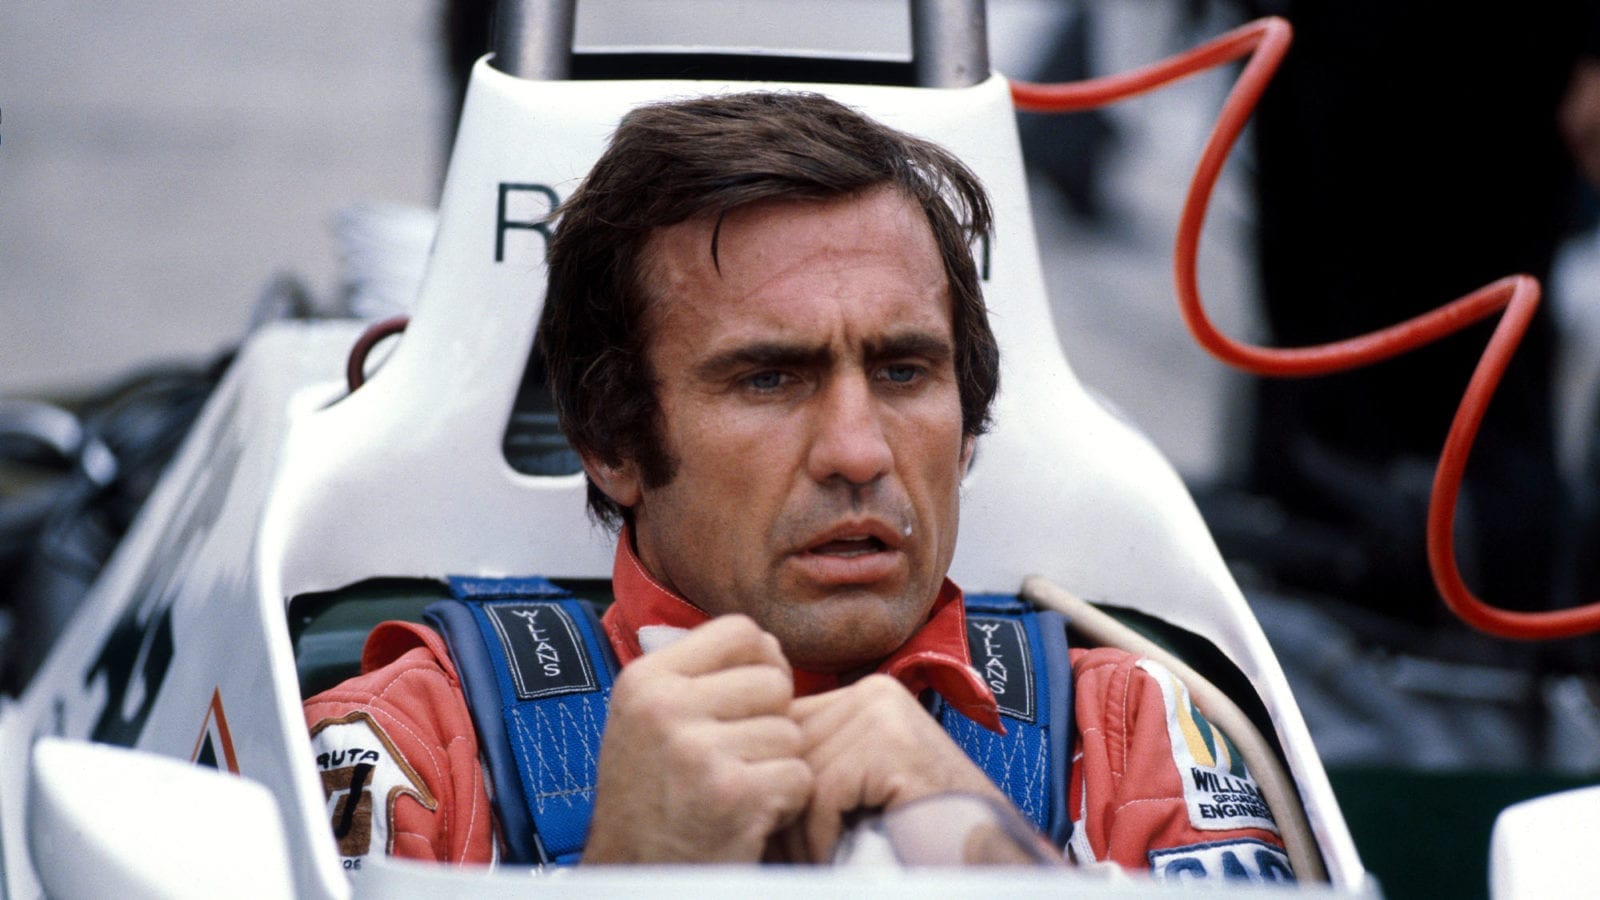 Carlos Reutemann, 1980. In the driving seat of a Williams racing car. He drove for Brabham, Ferrari, Lotus and finally Williams in 1980. (Photo by National Motor Museum/Heritage Images/Getty Images)